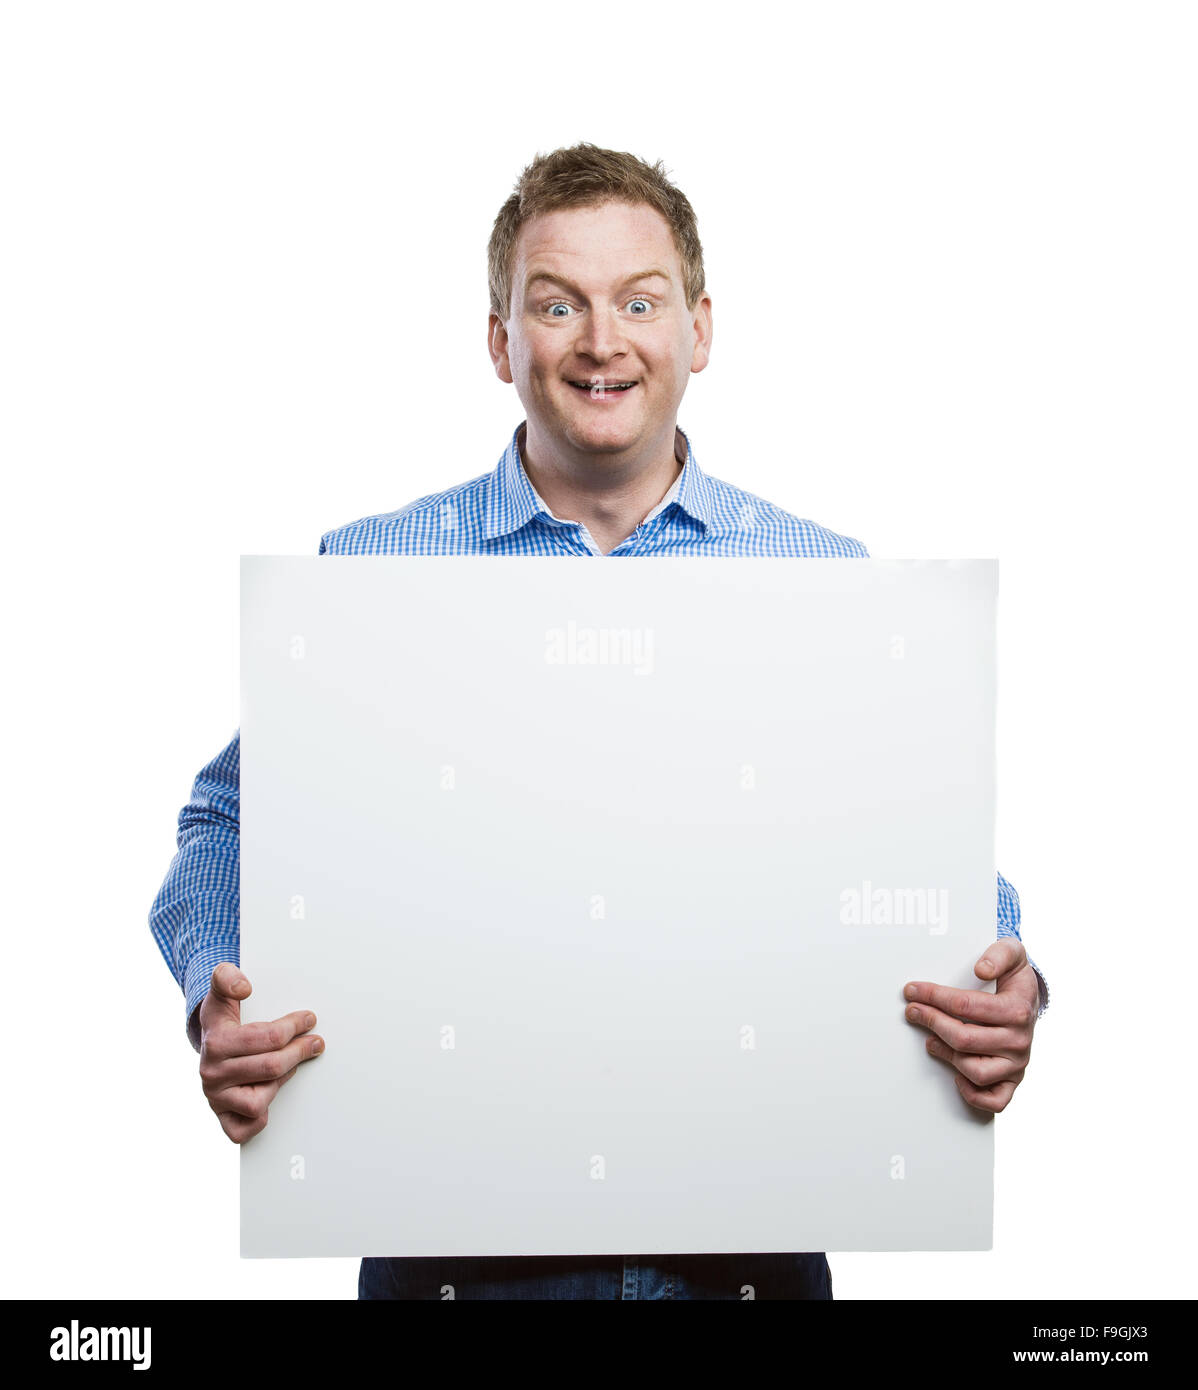 Young man making funny face, holding a blank sign board. Studio shot on white background. Stock Photo